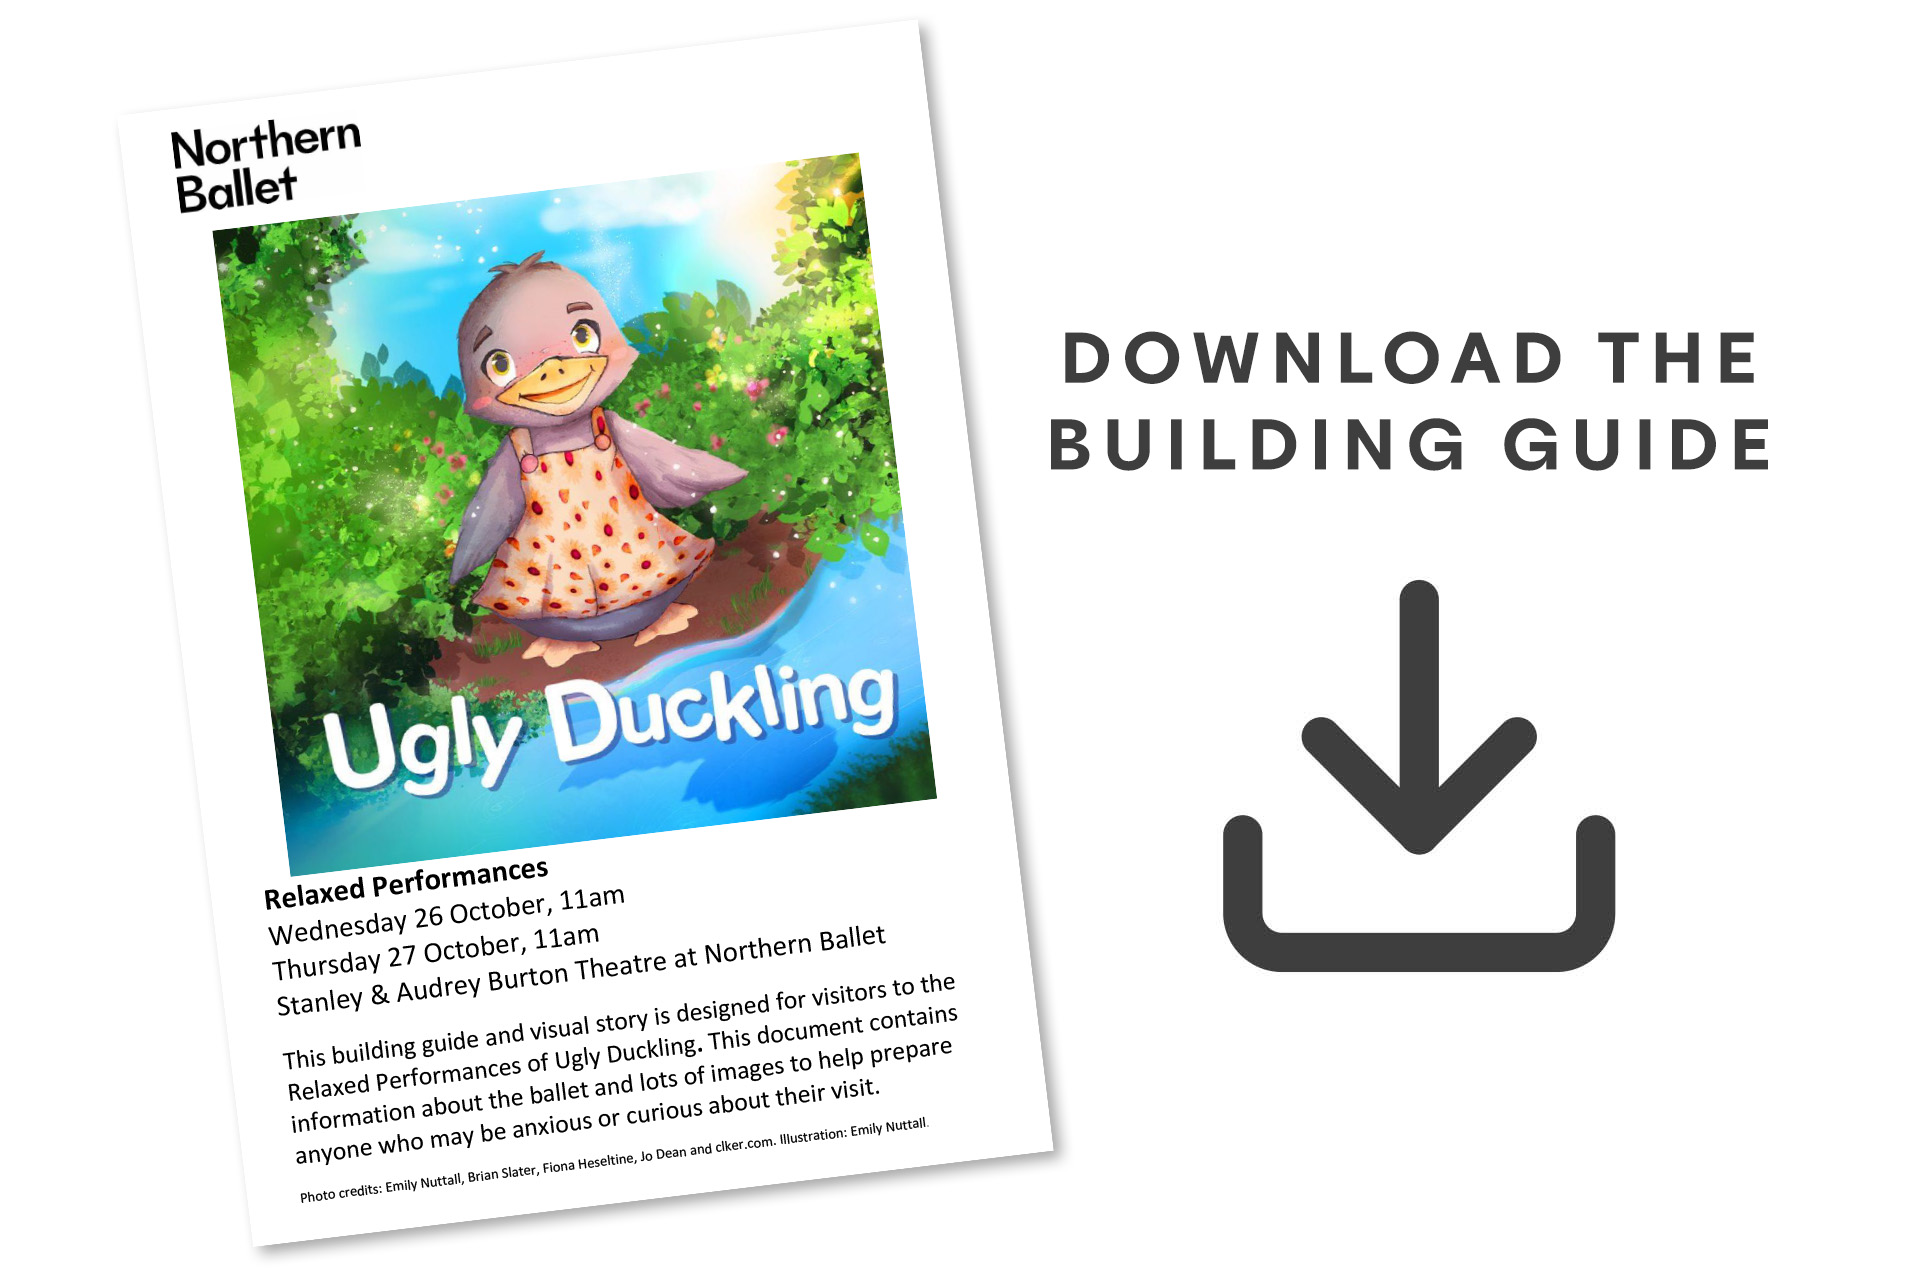 Download the building guide and Ugly Duckling story as a PDF